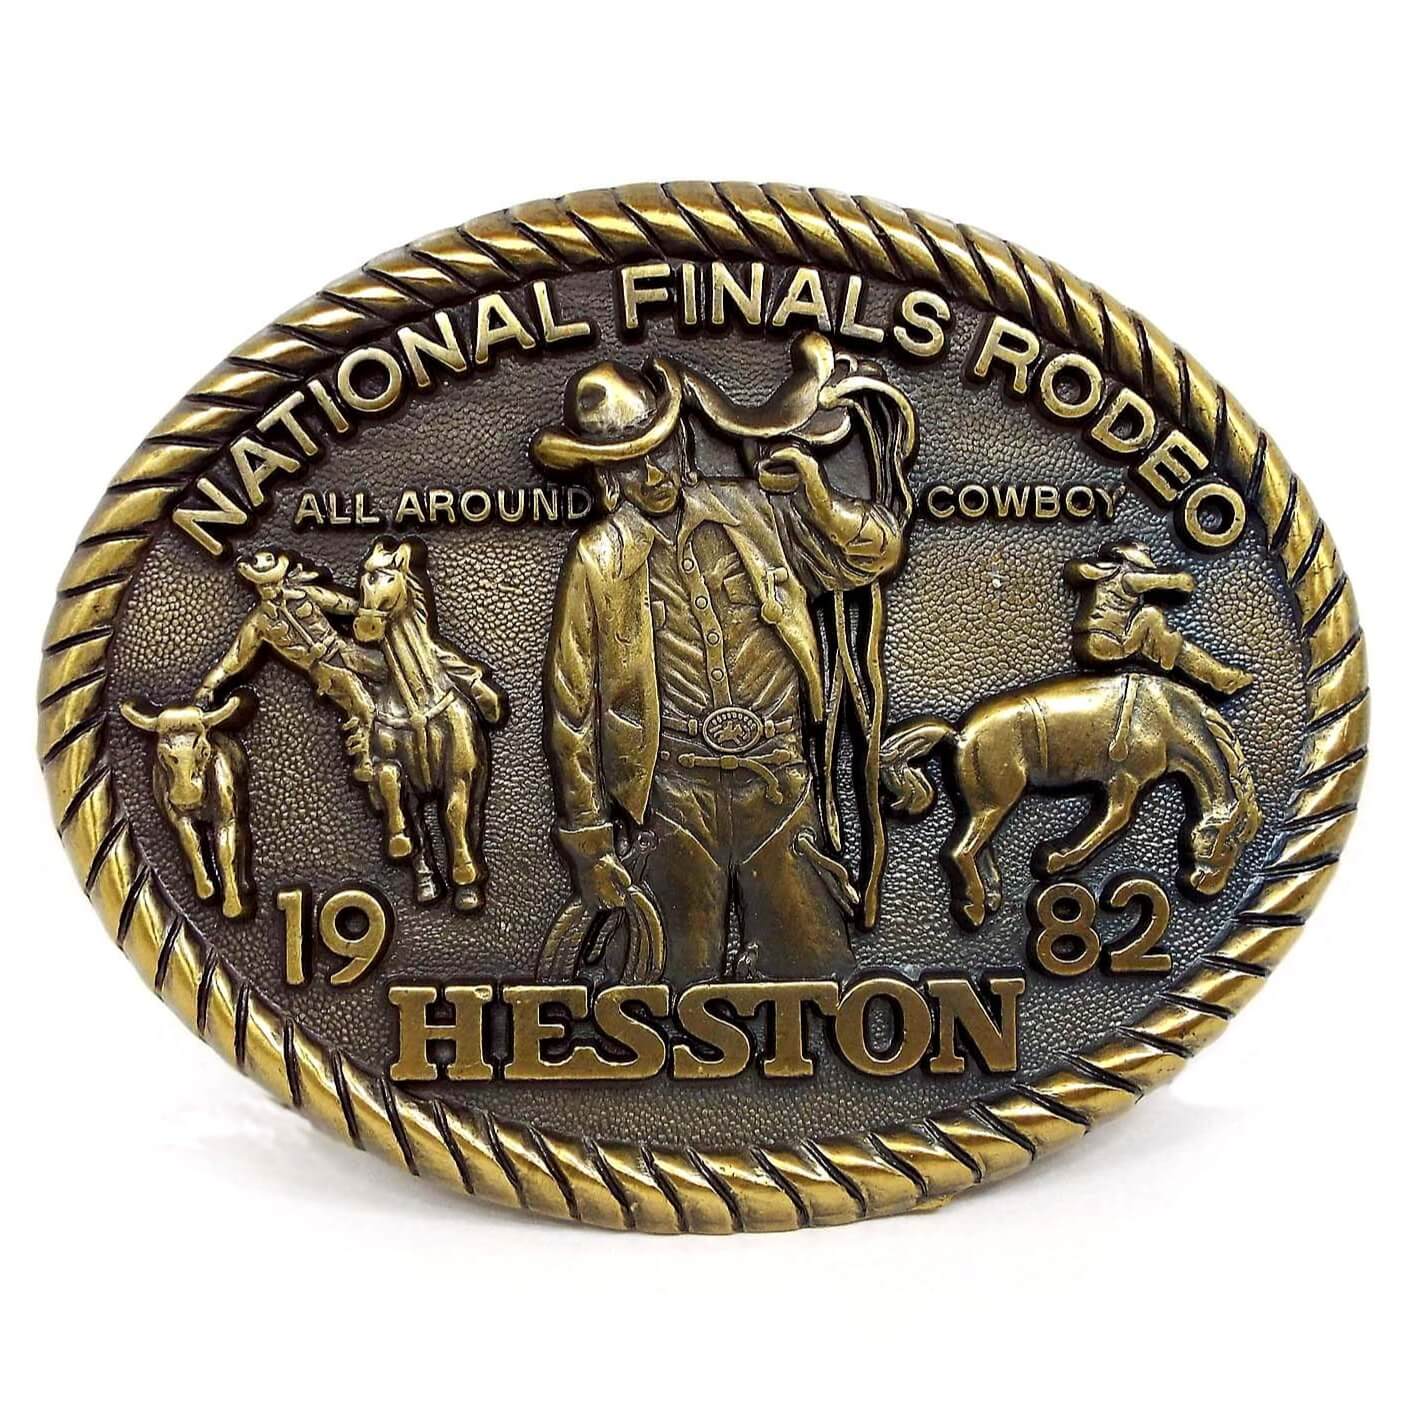 Front view of the retro vintage Hesston 1982 belt buckle. It is oval and antiqued brass in color. It says National Finals Rodeo All Around Cowboy 1982 Hesston on the front. There are depictions of a cowboy roping cattle, riding a bucking bronco, and carrying a horse saddle.